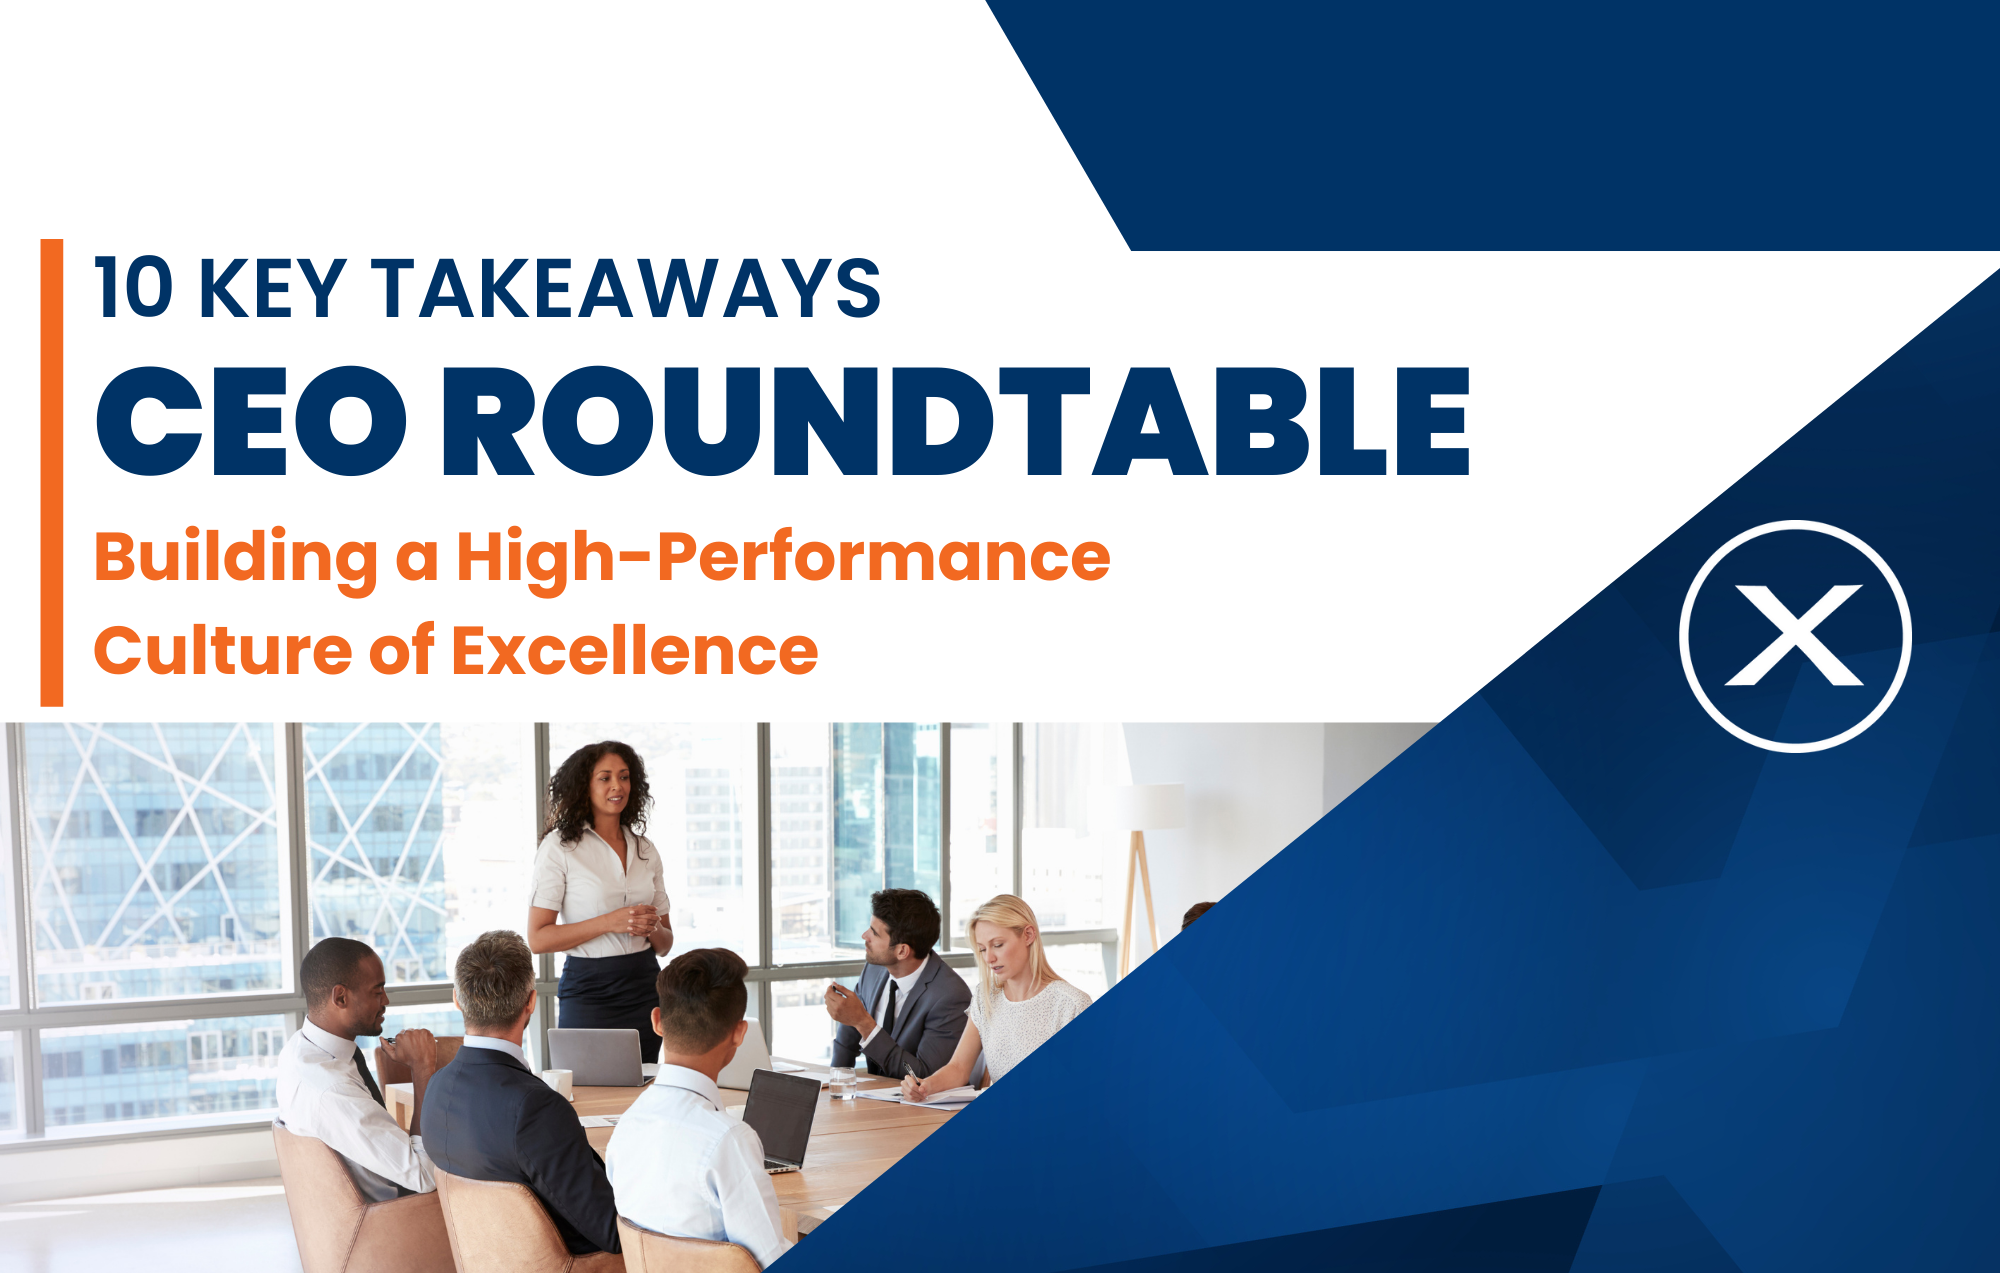 10 Key Takeaways for Building a High Performance Culture of Excellence